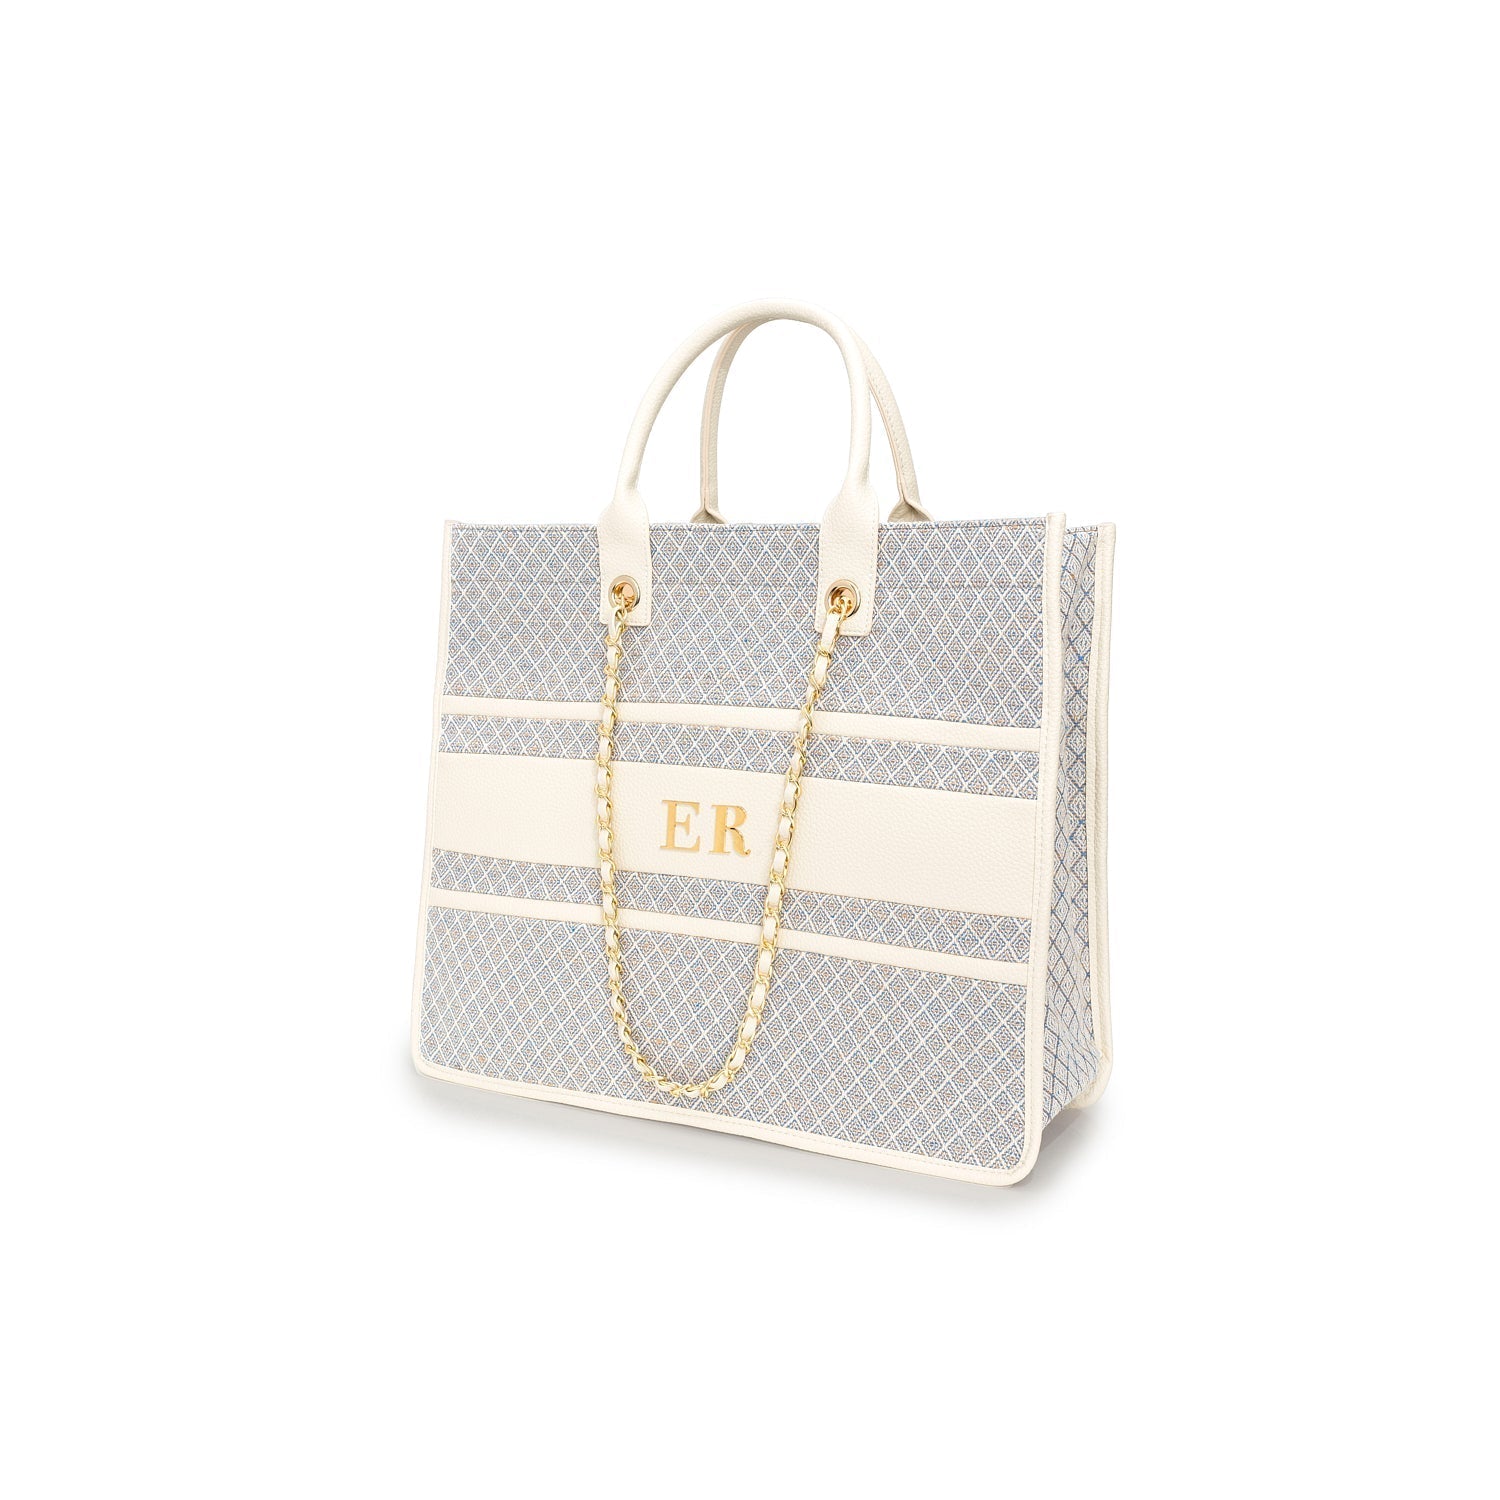 Deux Lux Vegan Leather Woven Weekend Bag Blue Satiny Interior in